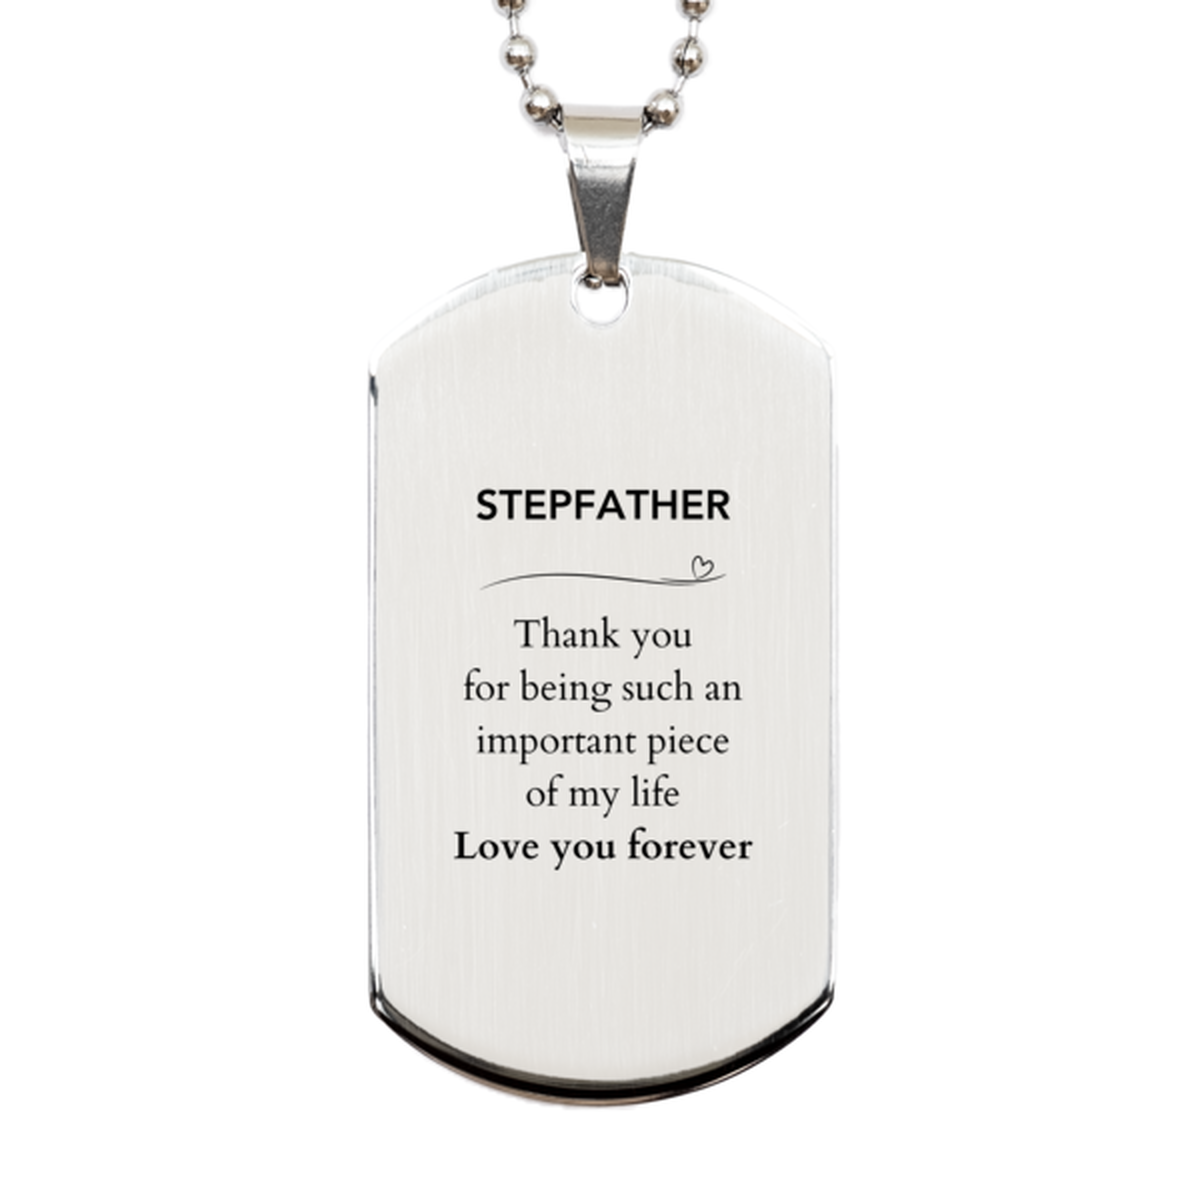 Appropriate Stepfather Silver Dog Tag Epic Birthday Gifts for Stepfather Thank you for being such an important piece of my life Stepfather Christmas Mothers Fathers Day